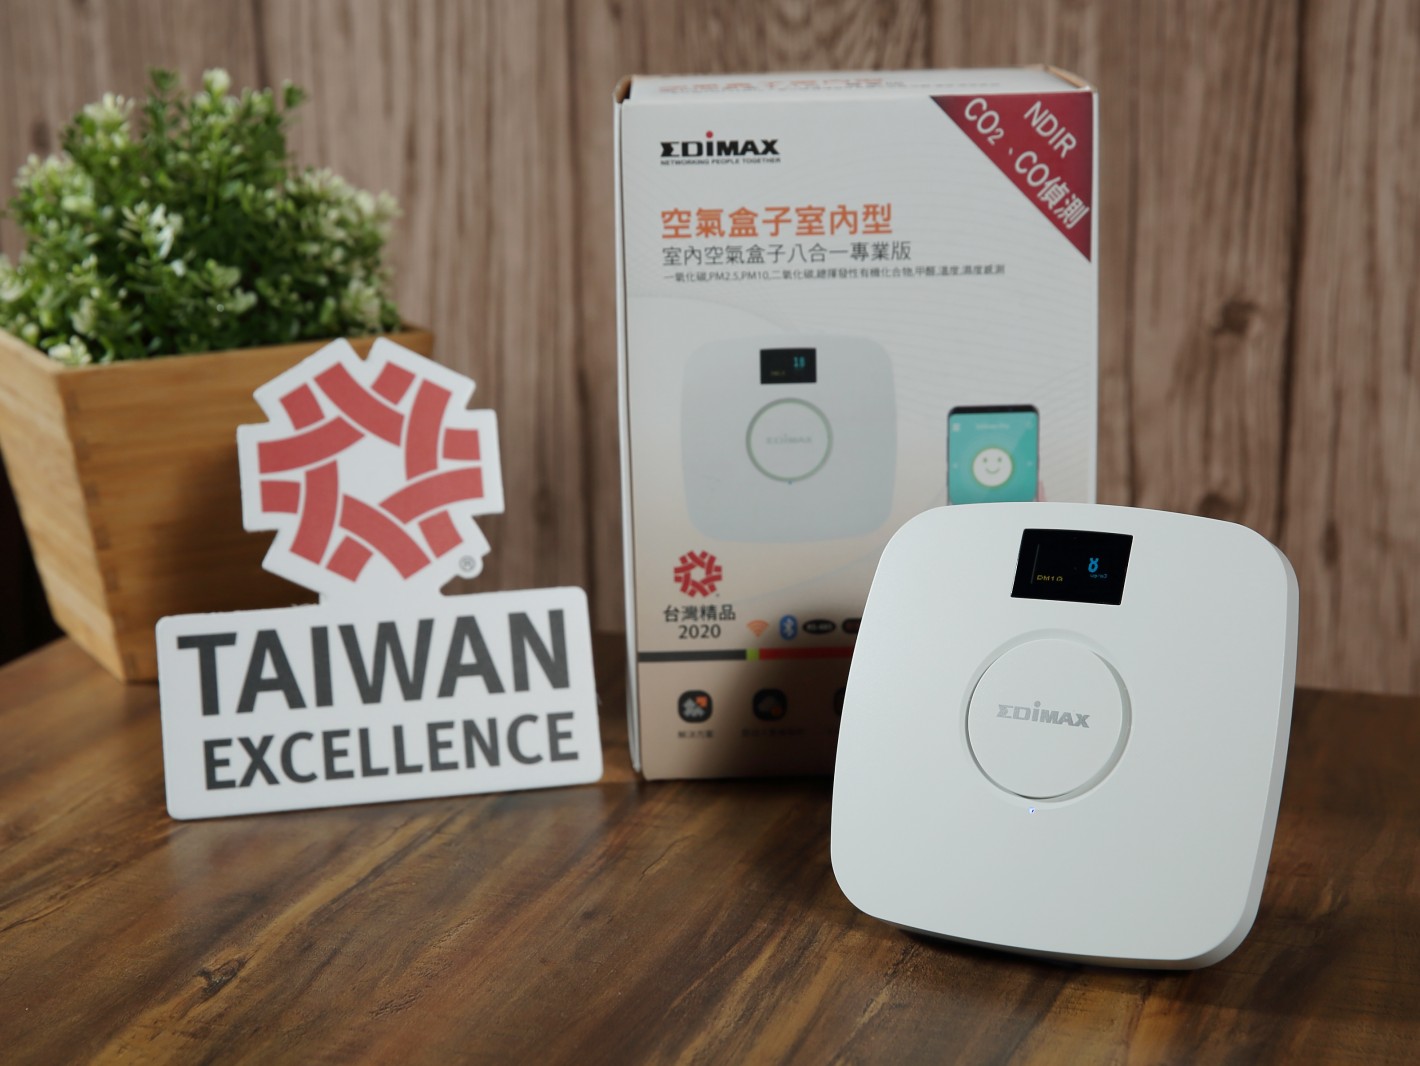 Having just won the 2020 Taiwan Excellence Award, the EdiGreen AirBox is a product that allows the user to obtain real-time information on local air pollution through the utilization of cloud technolo